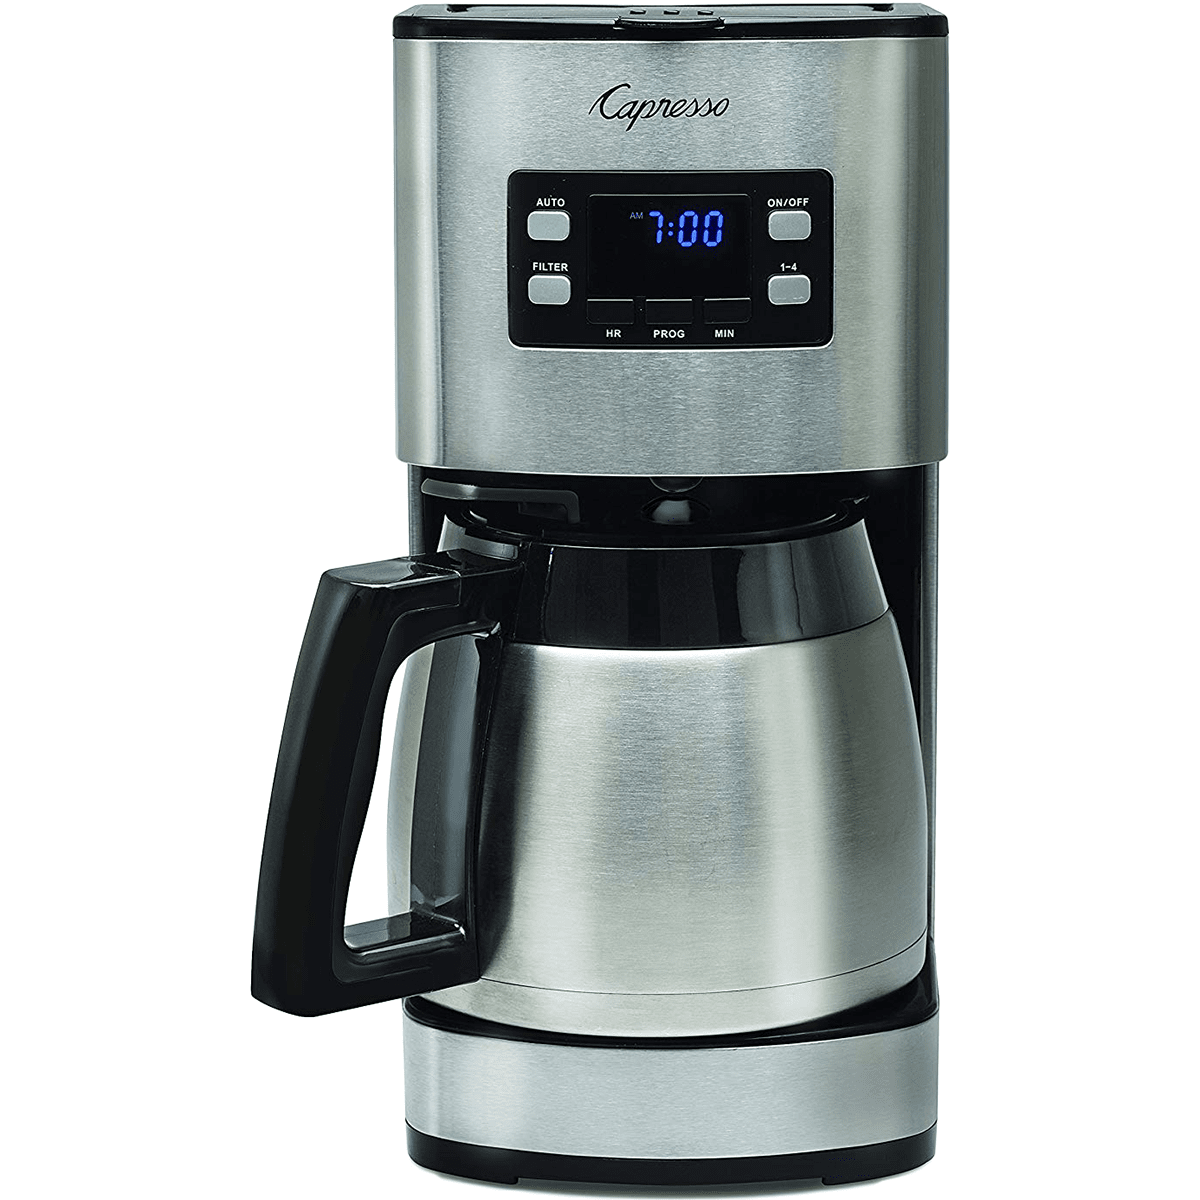 Capresso St300 10 Cup Stainless Steel Coffee Maker With Thermal Carafe